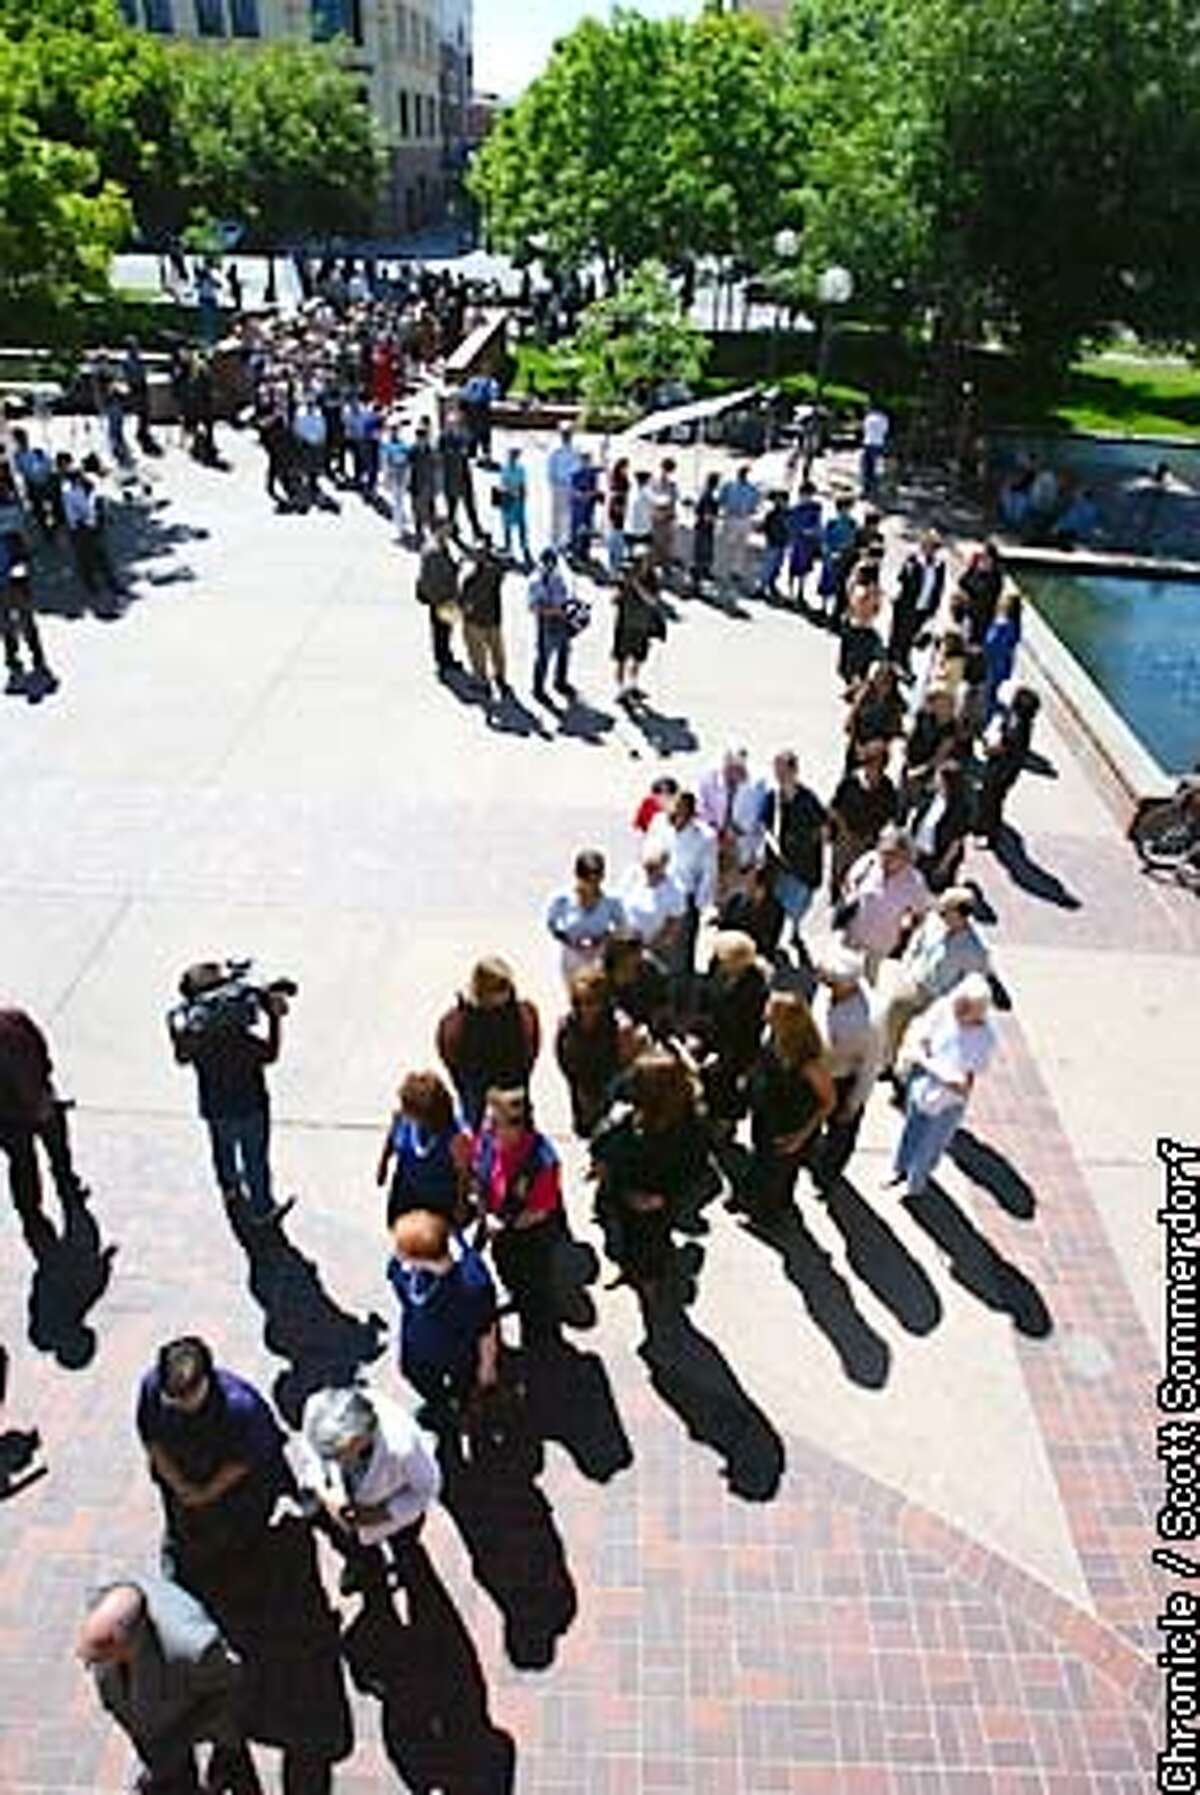 A line forms outside the Centre Plaza building where the memorial service was held. A public memorial service was held for Chandra Levy this morning in Modesto. CHRONICLE PHOTO BY SCOTT SOMMERDORF